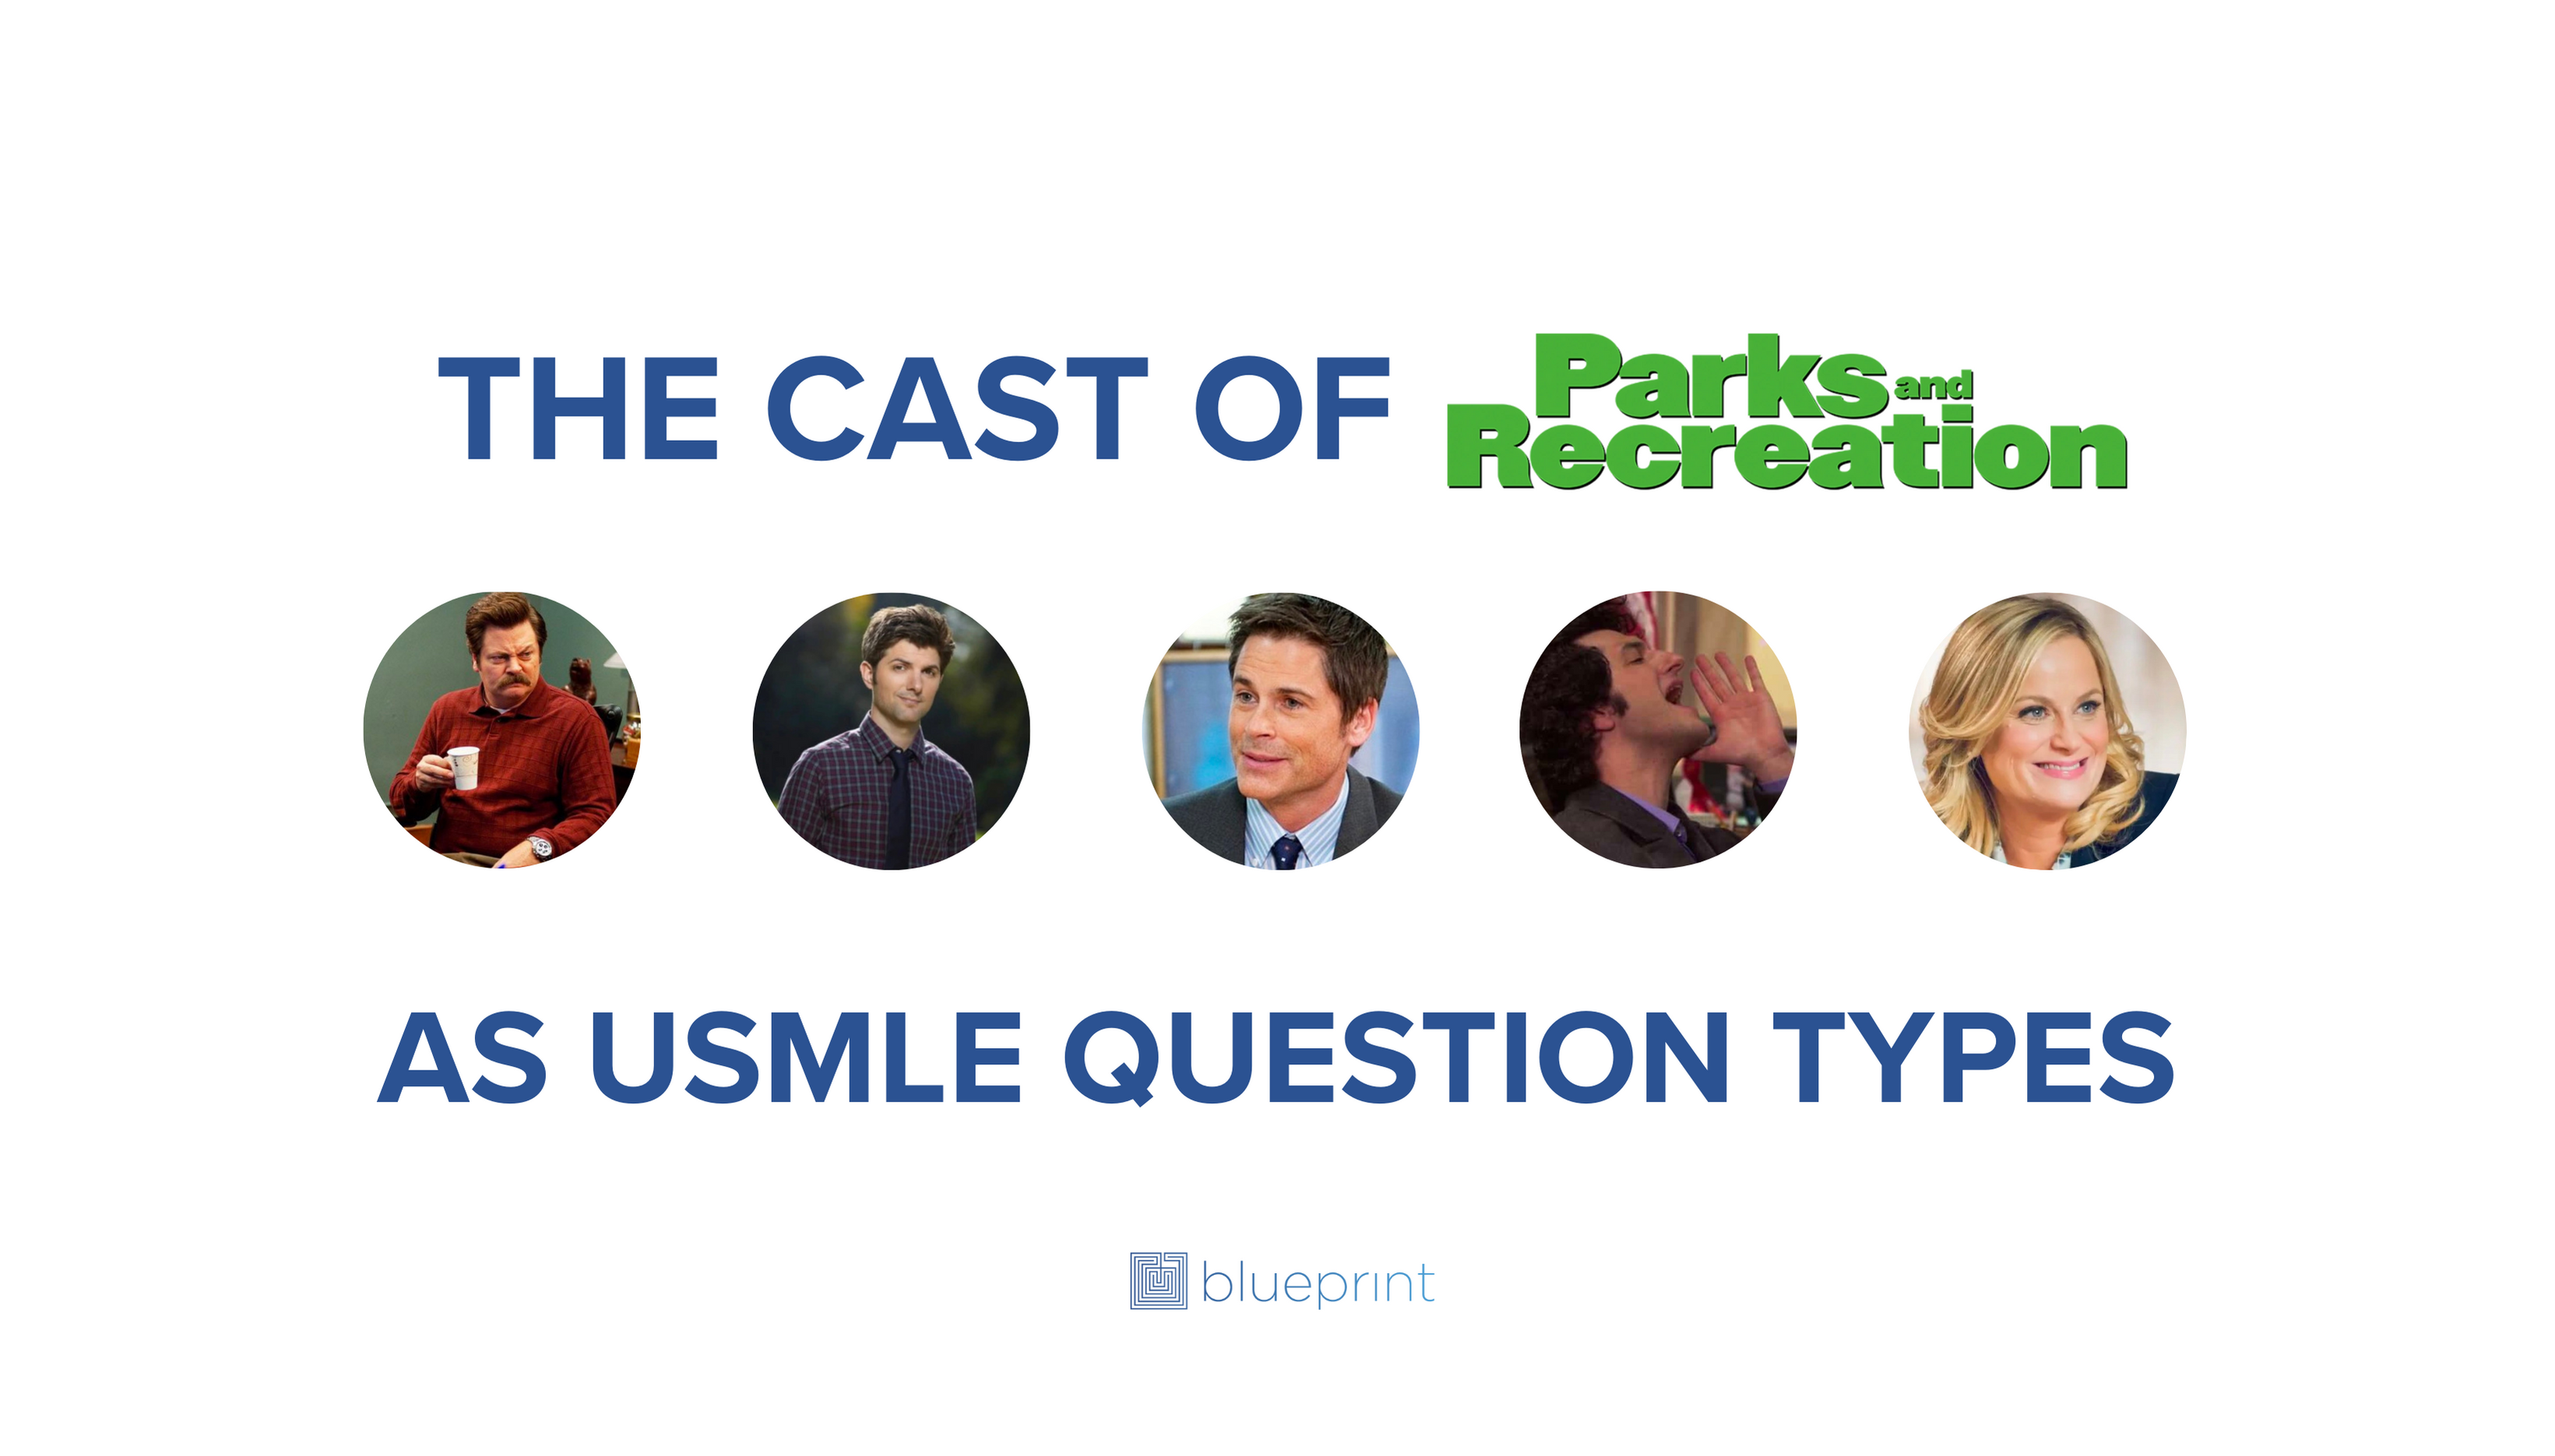 5 USMLE Question Types As “Parks and Recreation” Characters